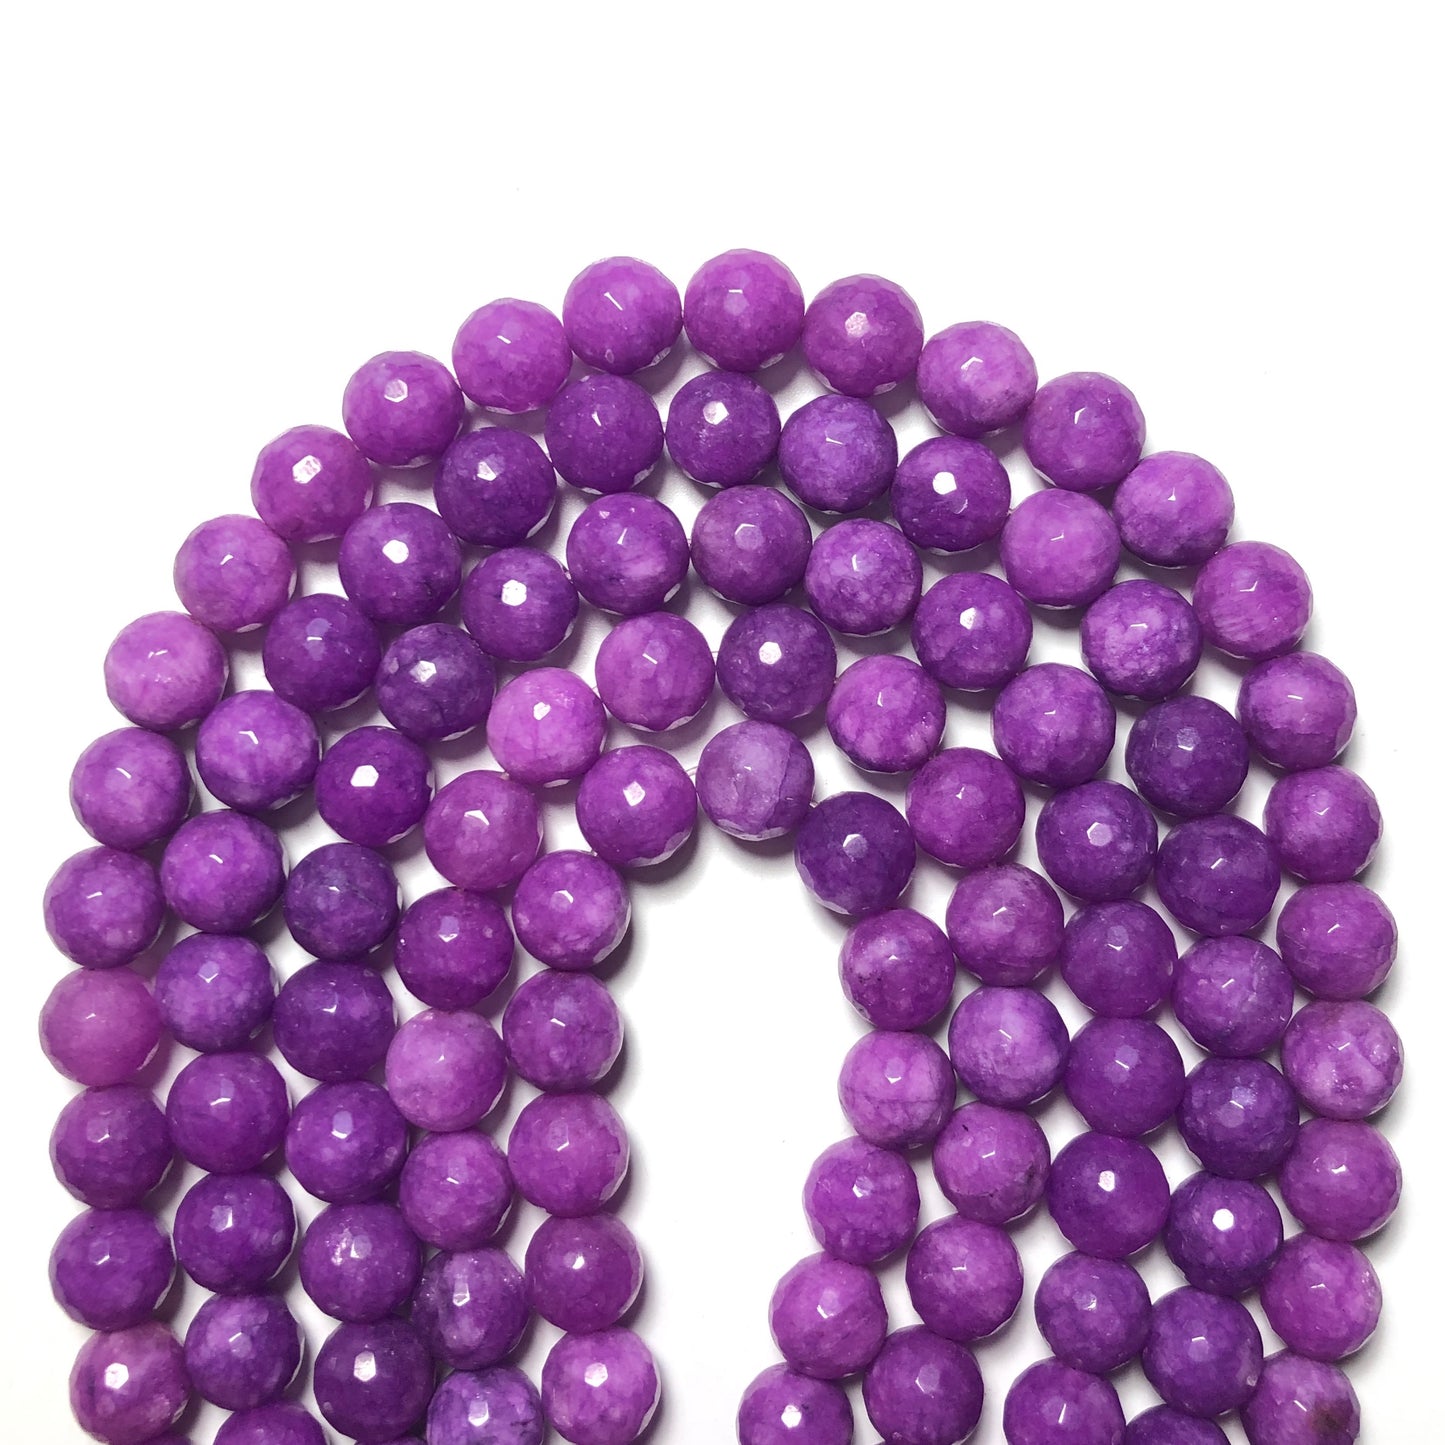 2 Strands/lot 12mm Purple Faceted Jade Stone Beads Stone Beads 12mm Stone Beads Faceted Jade Beads New Beads Arrivals Charms Beads Beyond